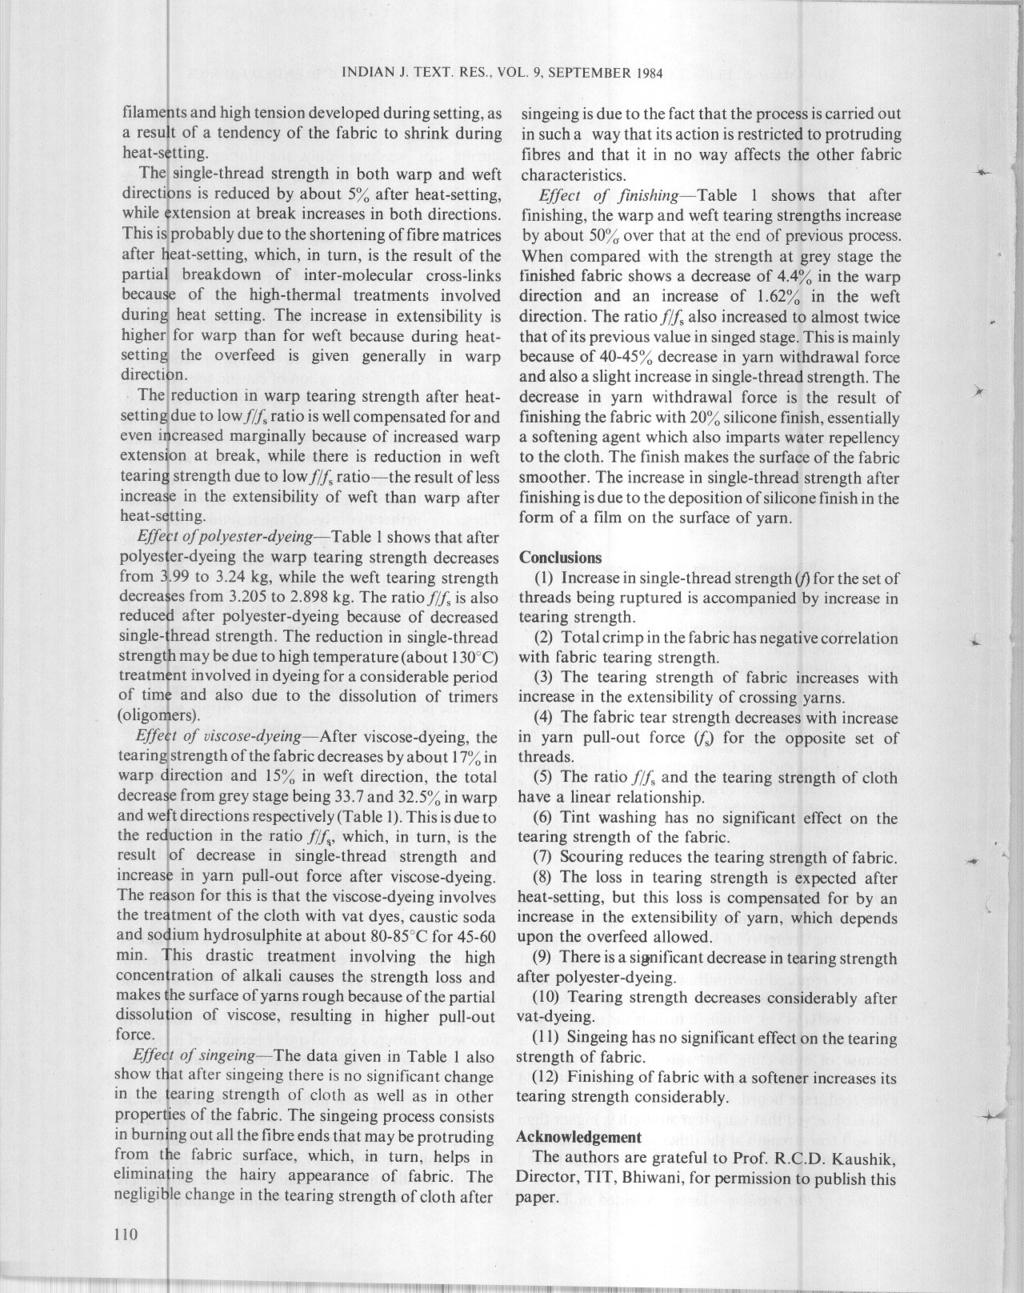 INDIAN J. TEXT. RES., VOL. 9, SEPTEMBER 1984 filaments and high tension developed during setting, as a result of a tendency of the fabric to shrink during heat-setting.